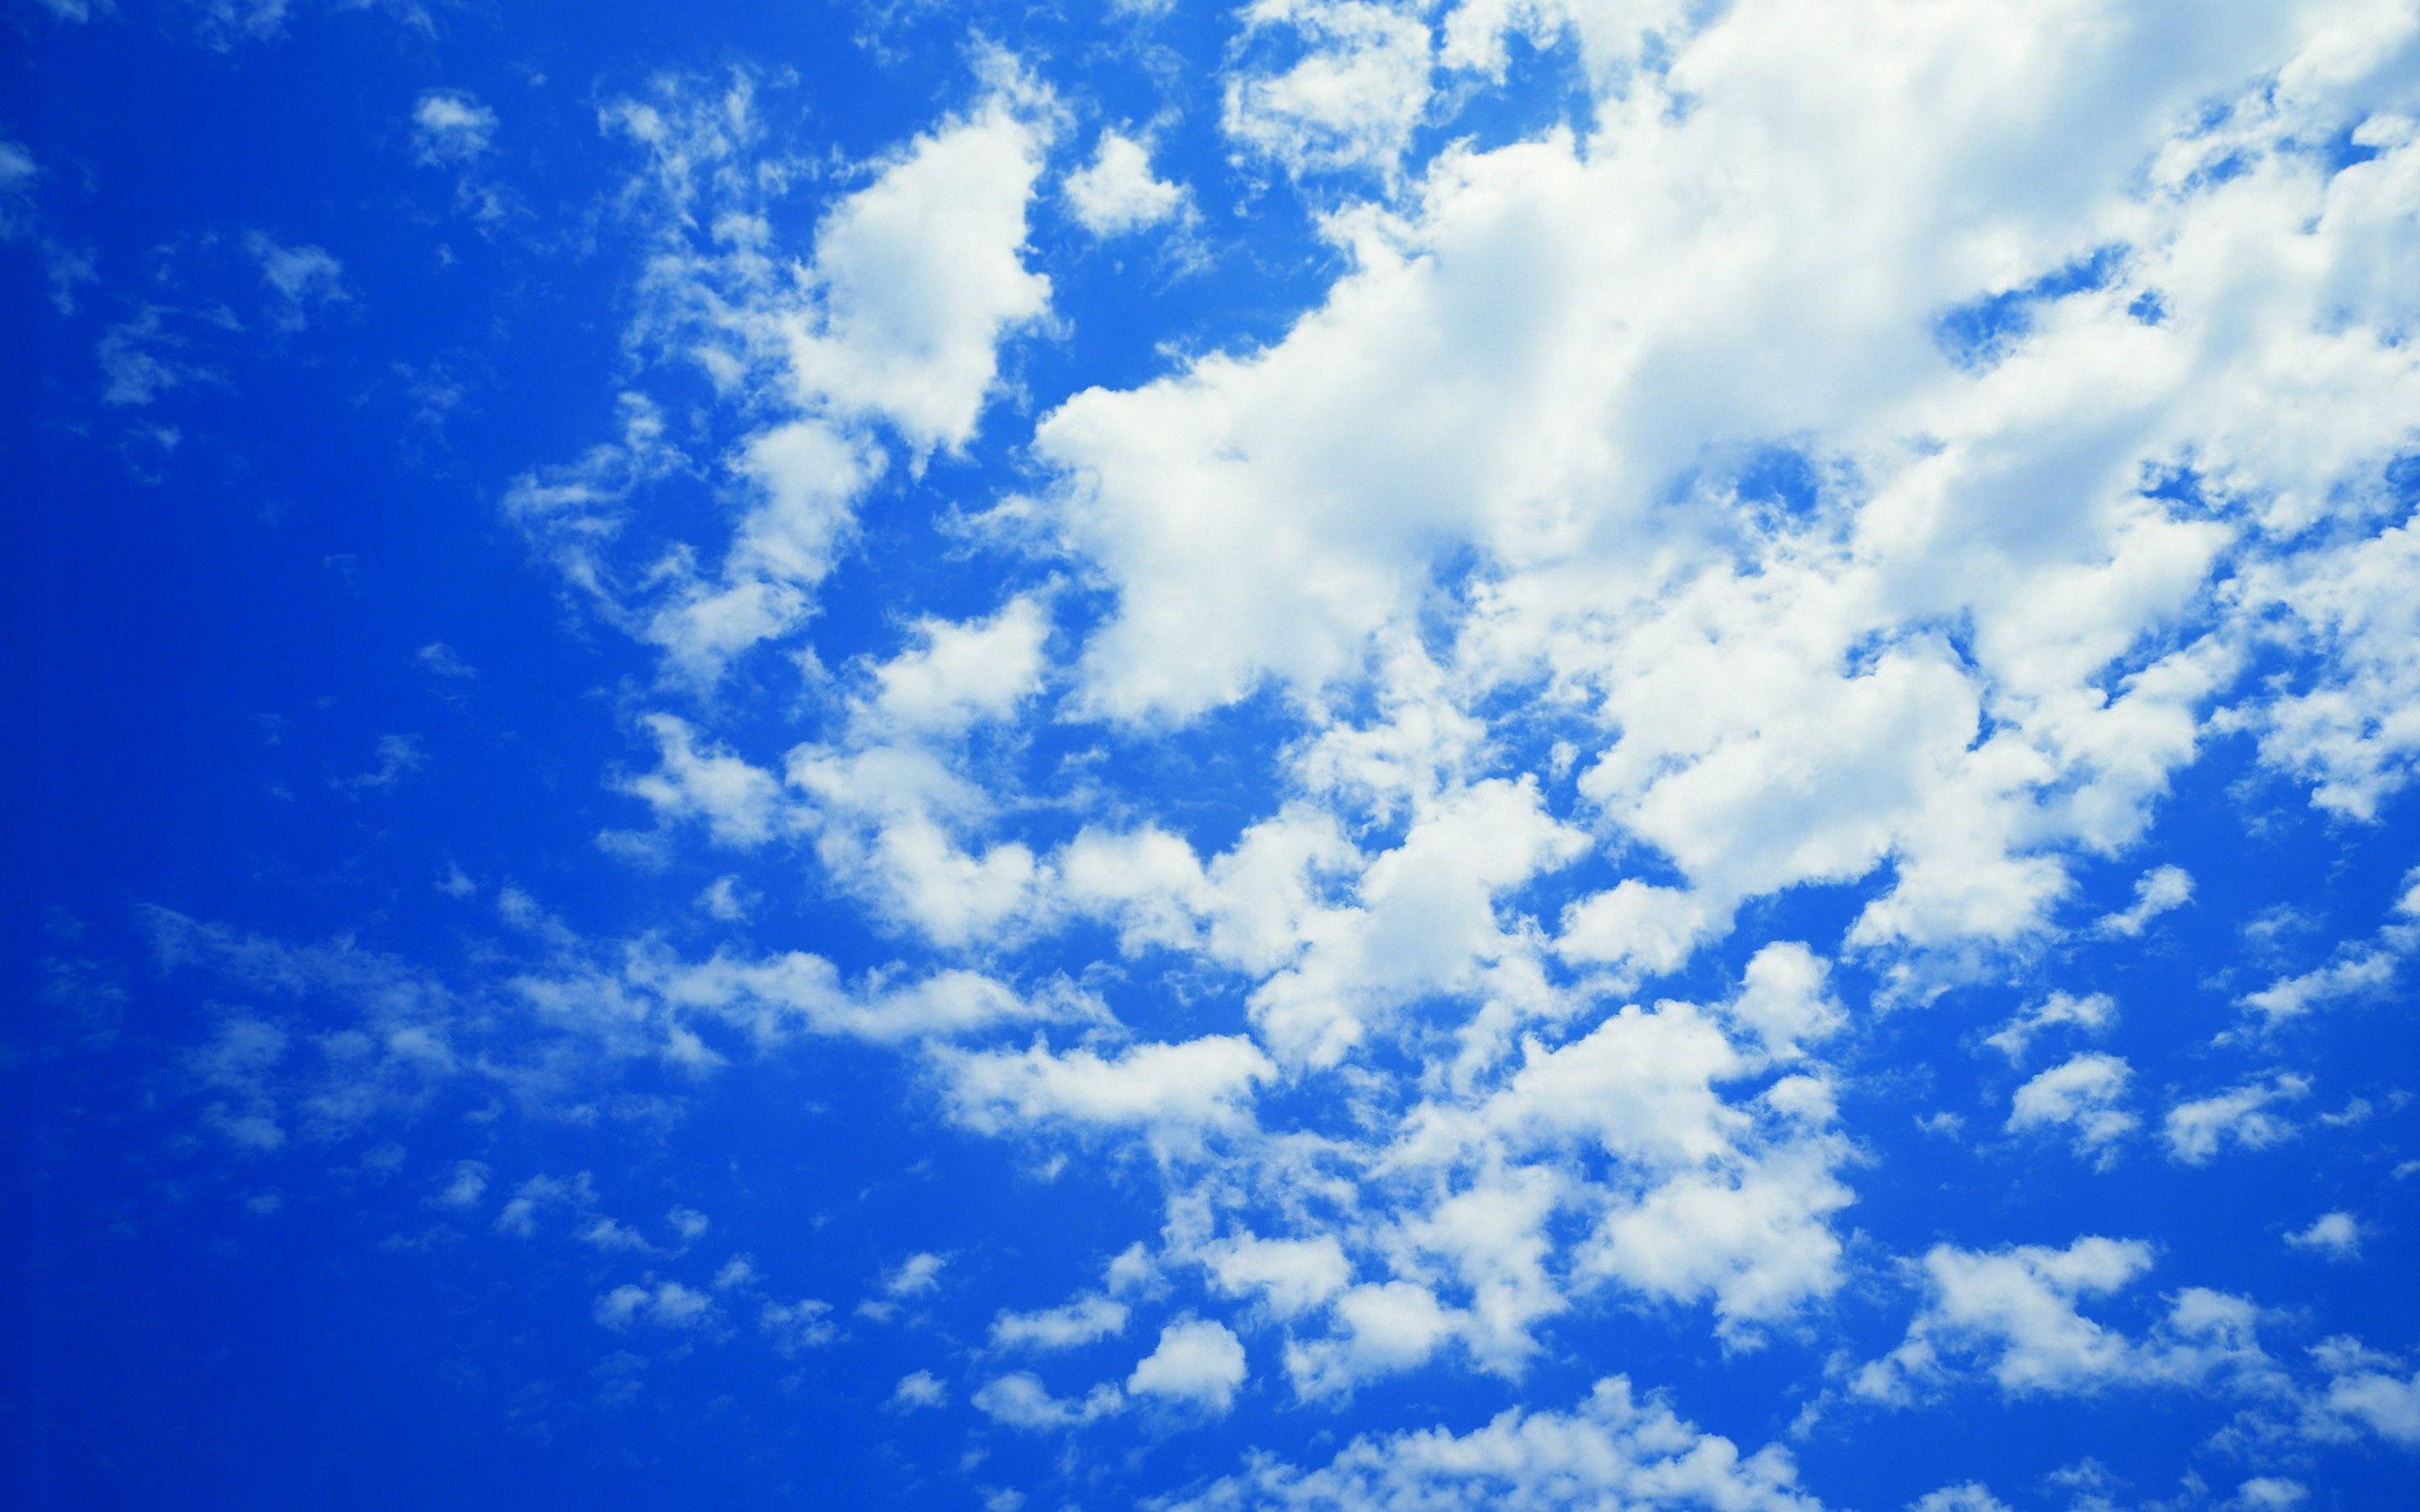 Blue Sky Clouds Wallpaper Free Blue Sky Clouds Background